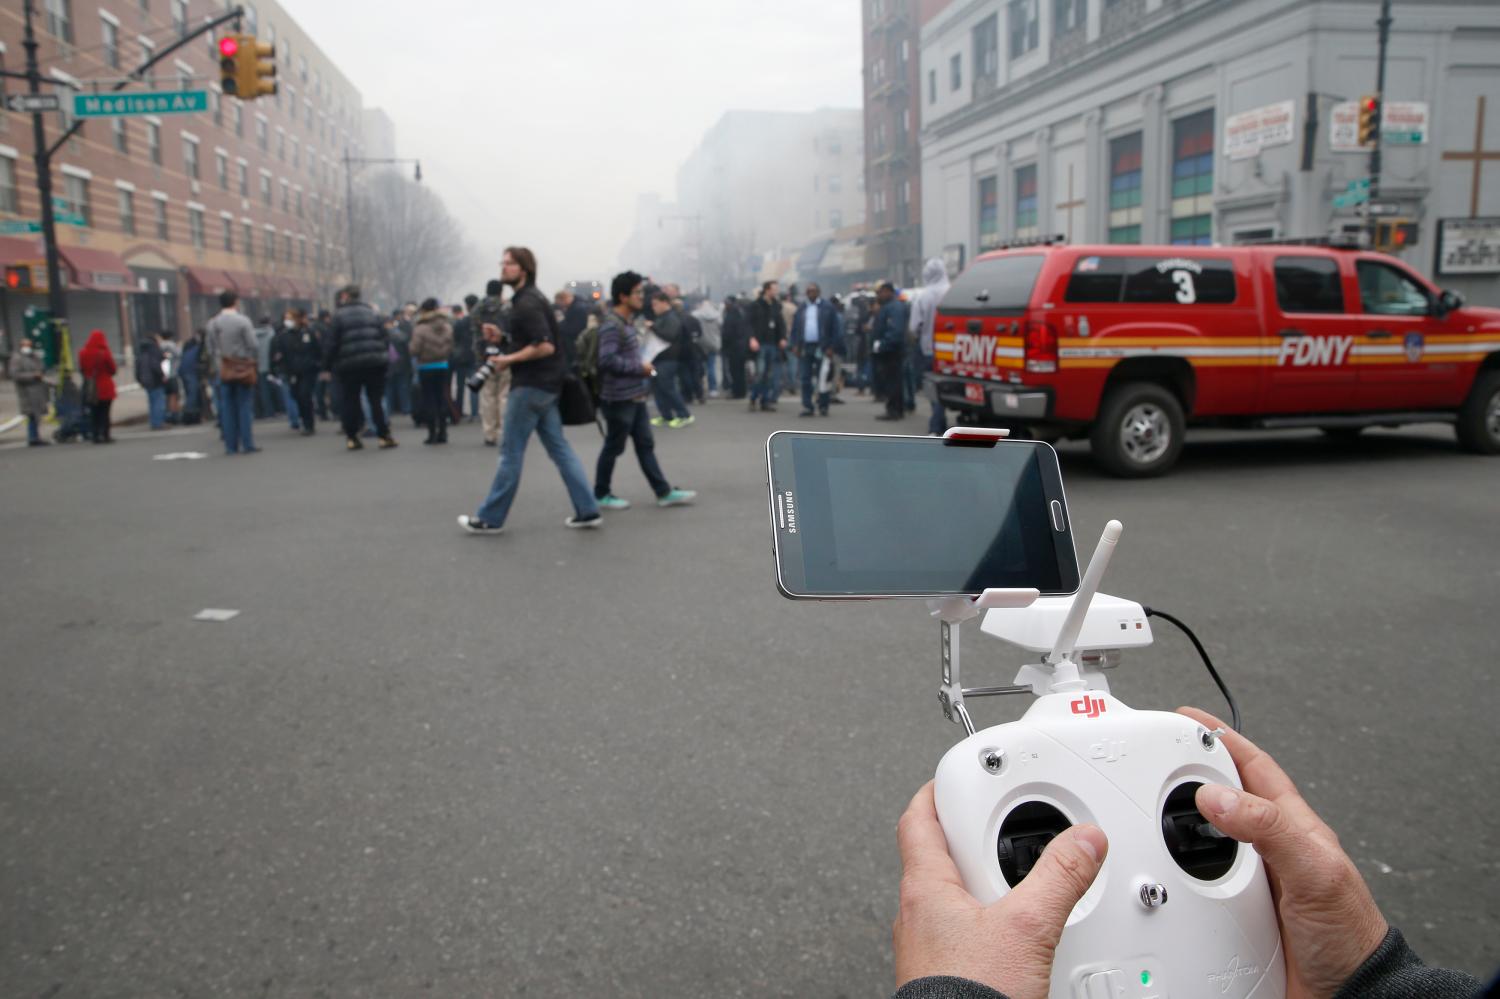 A camera drone flown by Brian Wilson flies near the scene where two buildings were destroyed in an explosion, in the East Harlem section in New York City, March 12, 2014. REUTERS/Mike Segar